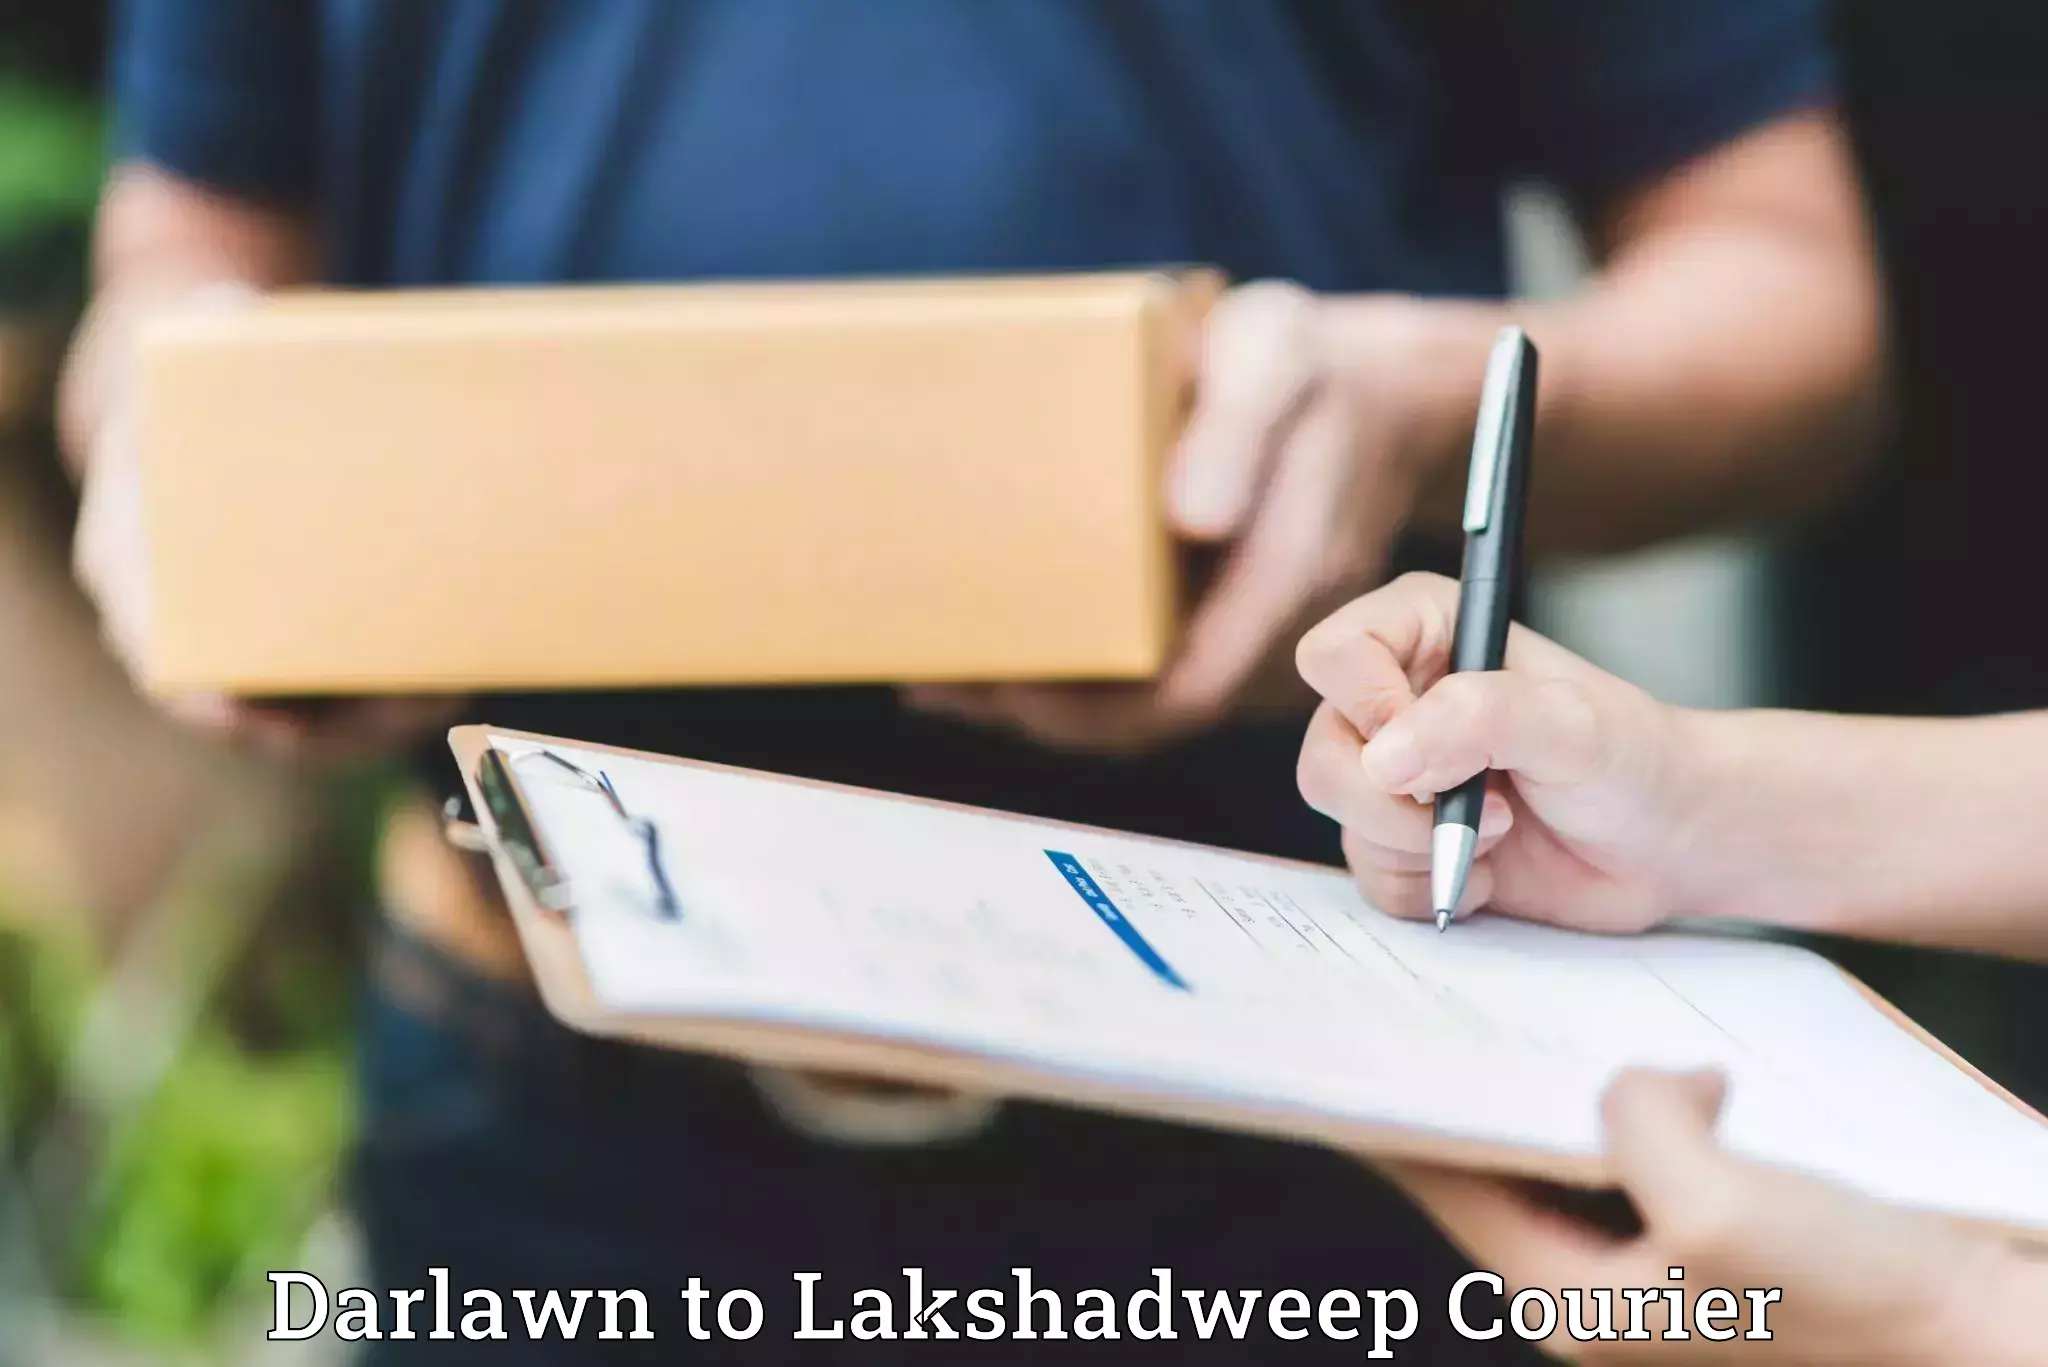 Furniture relocation experts Darlawn to Lakshadweep